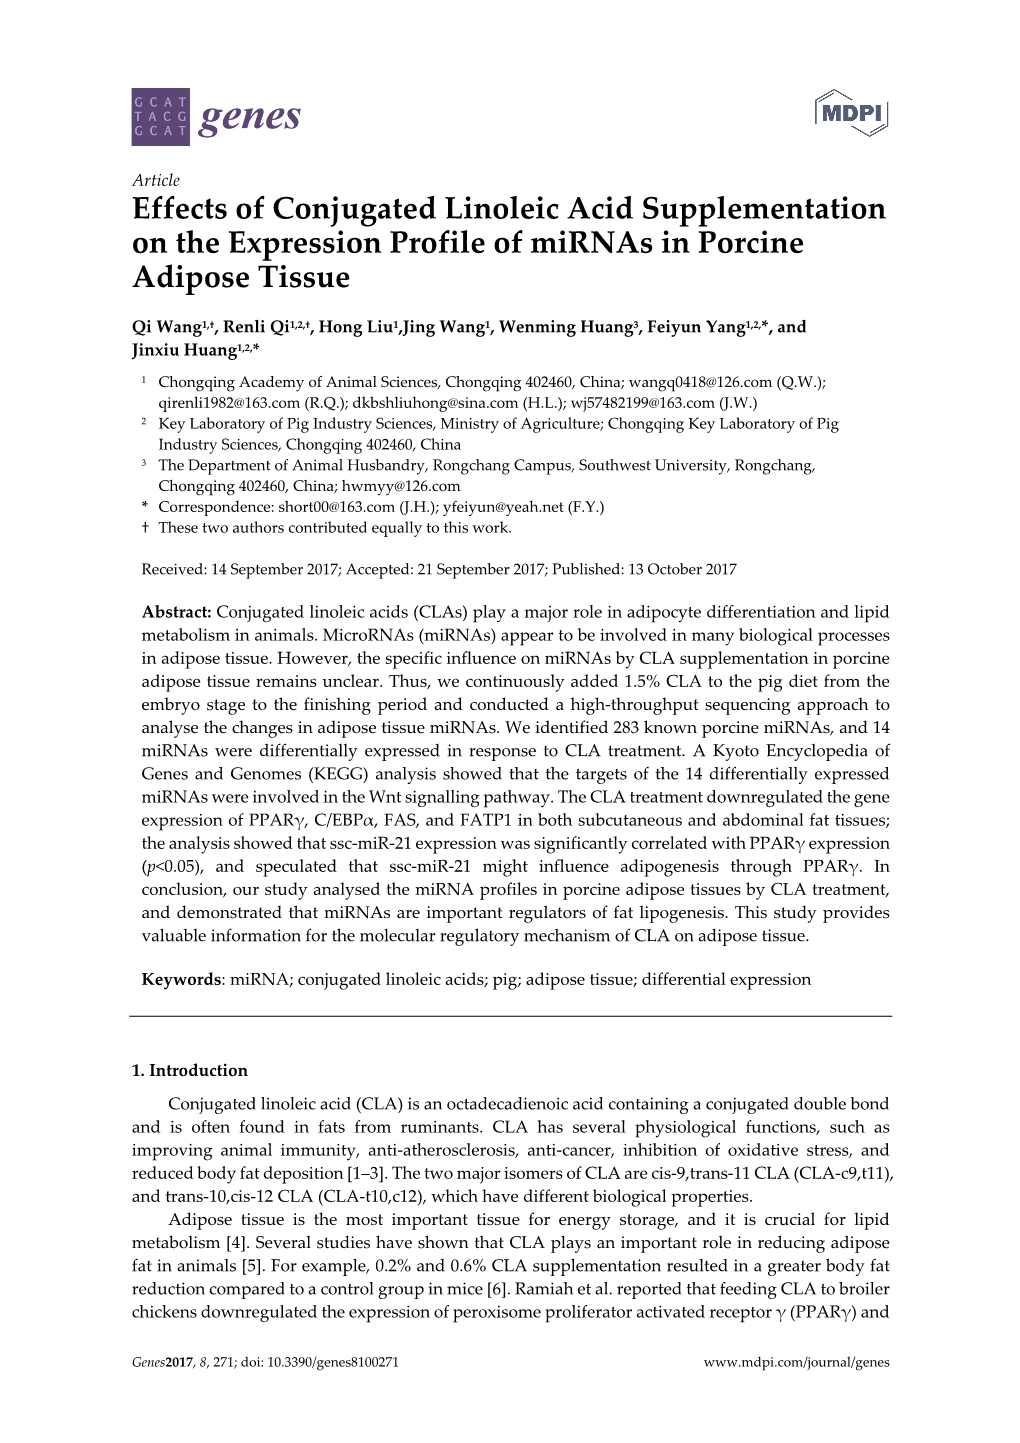 Effects of Conjugated Linoleic Acid Supplementation on the Expression Profile of Mirnas in Porcine Adipose Tissue